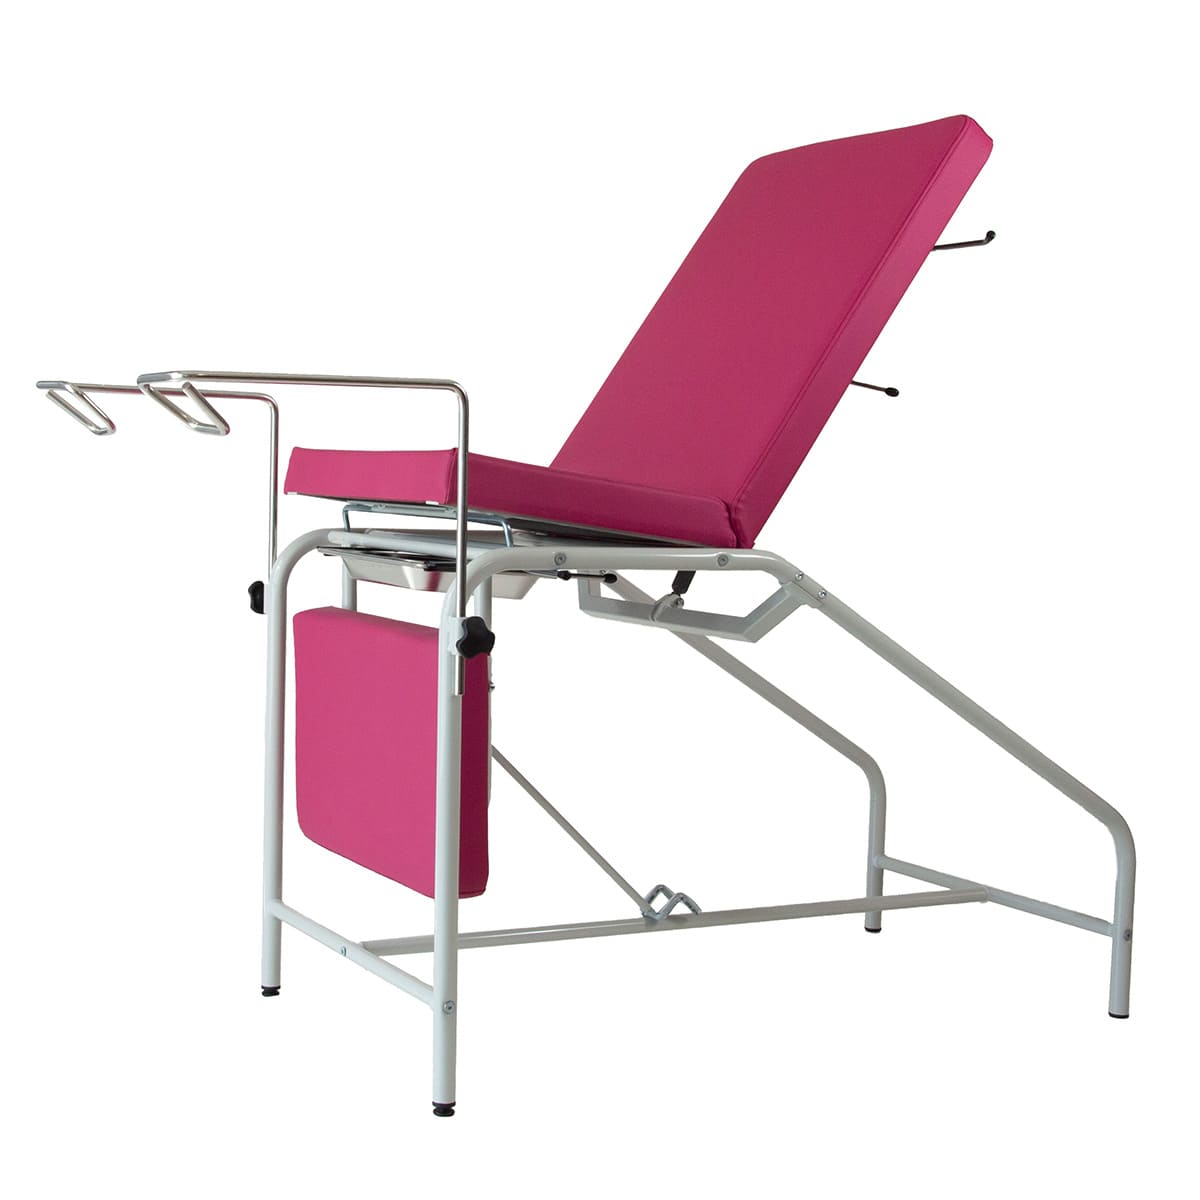 Gynaecological chair 3 sections, with pair of stirrups